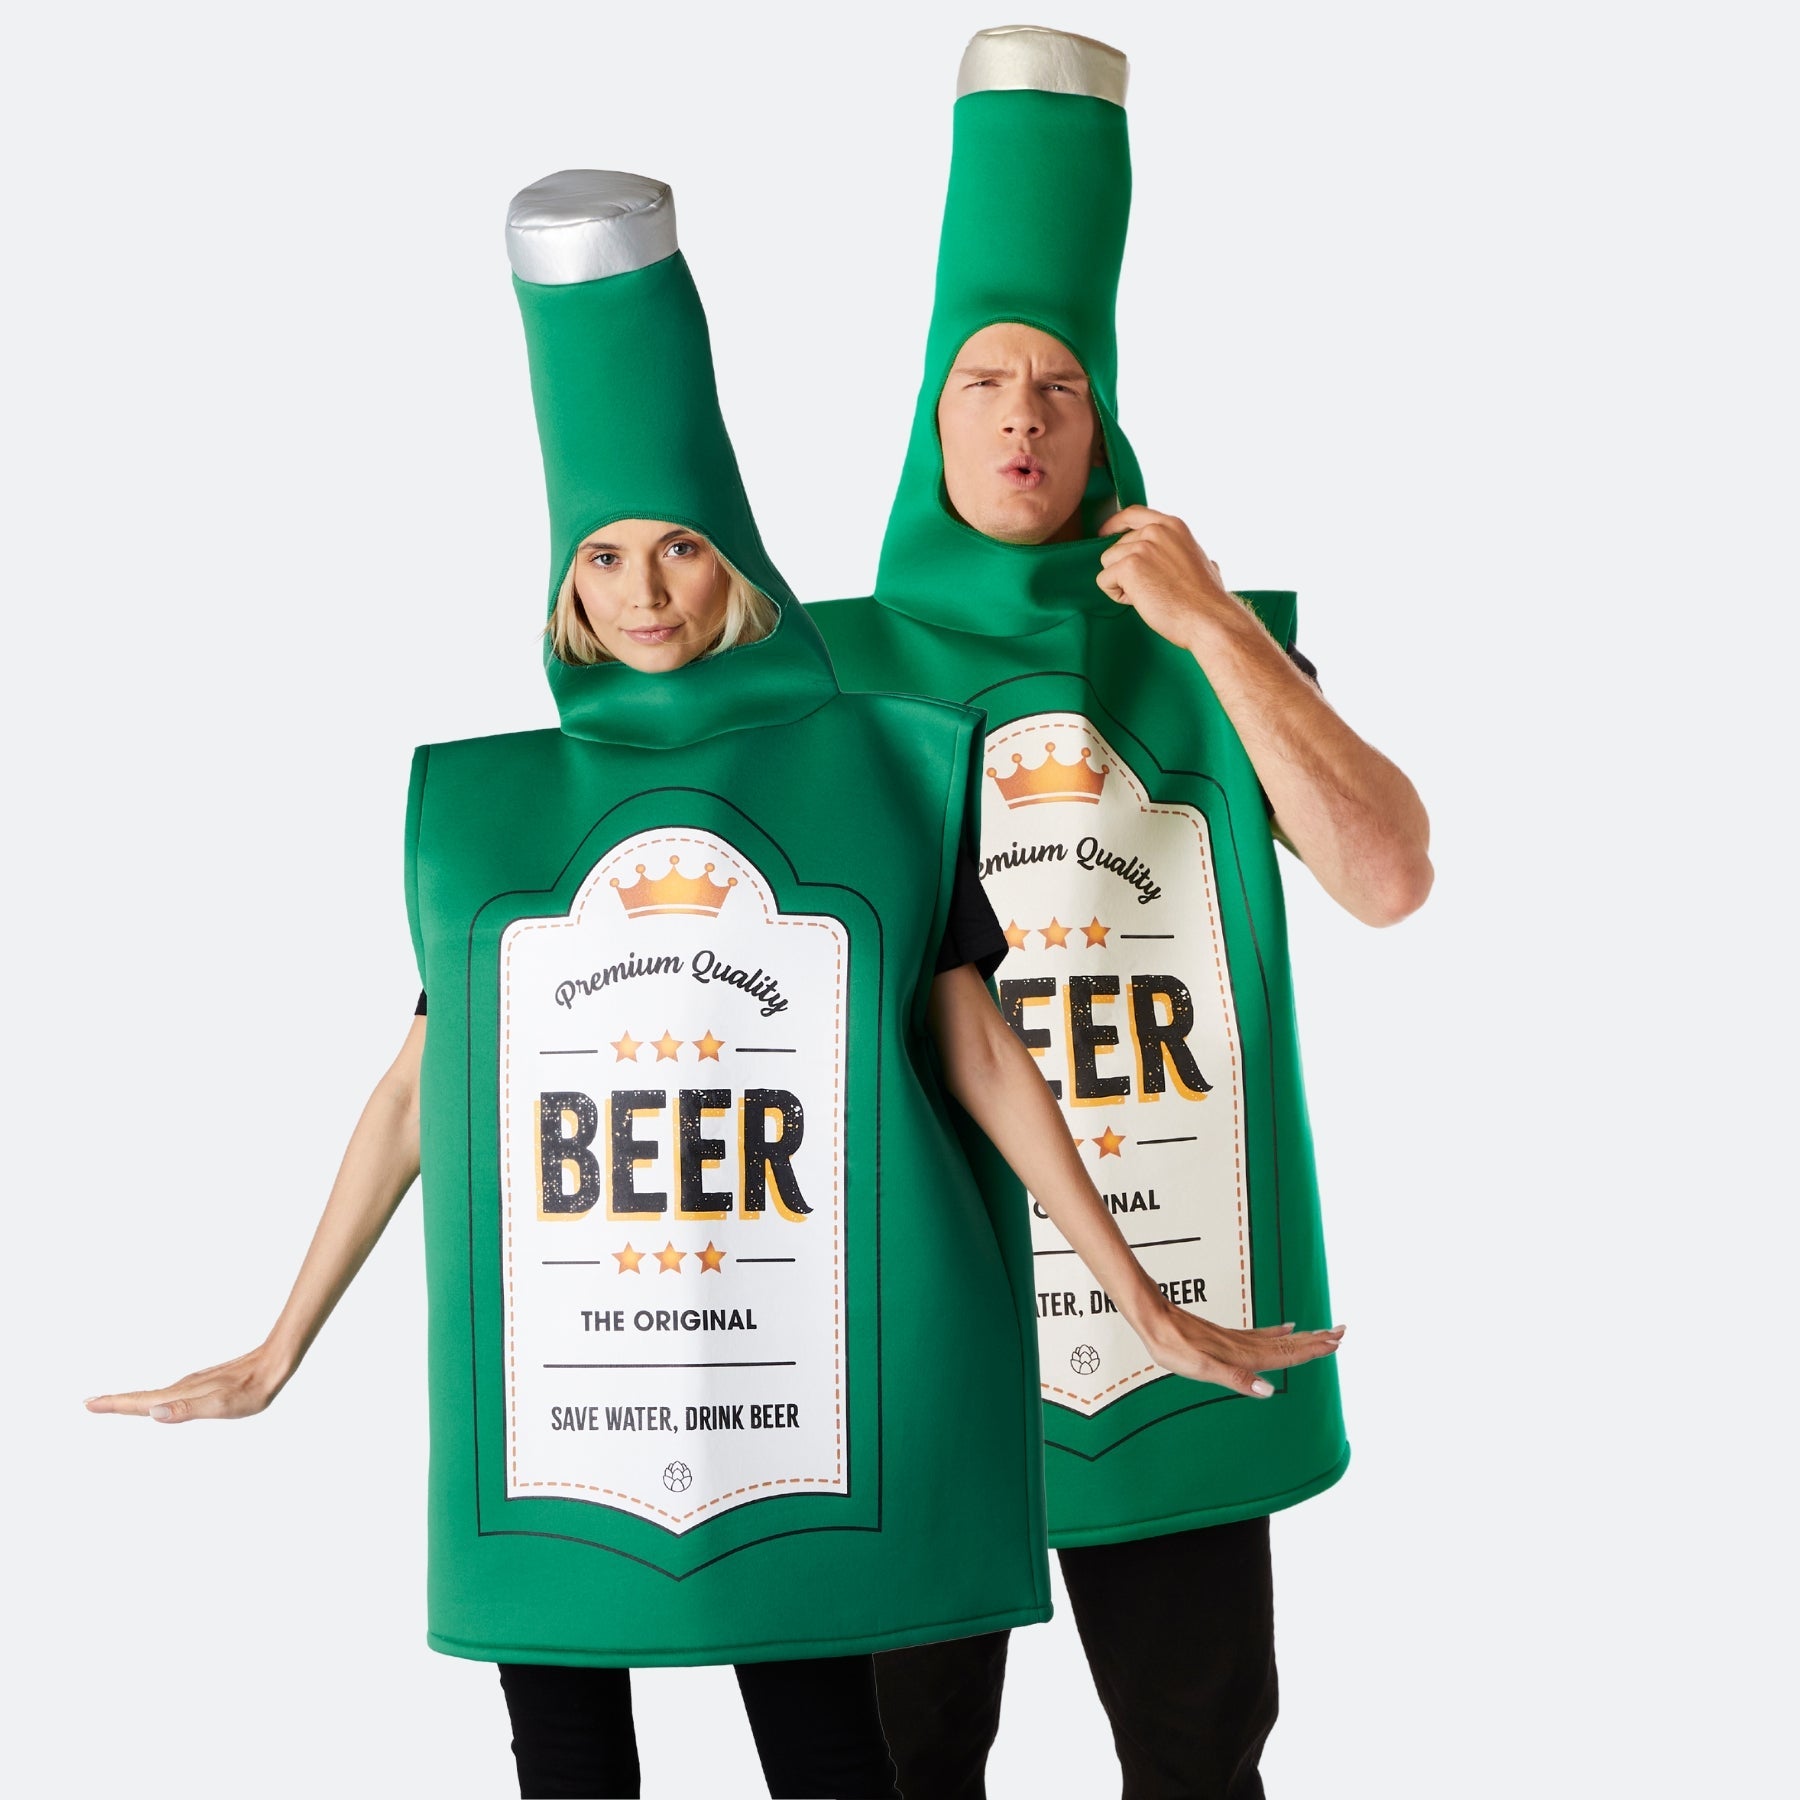 Beer Bottle Costume - Europe's largest selection